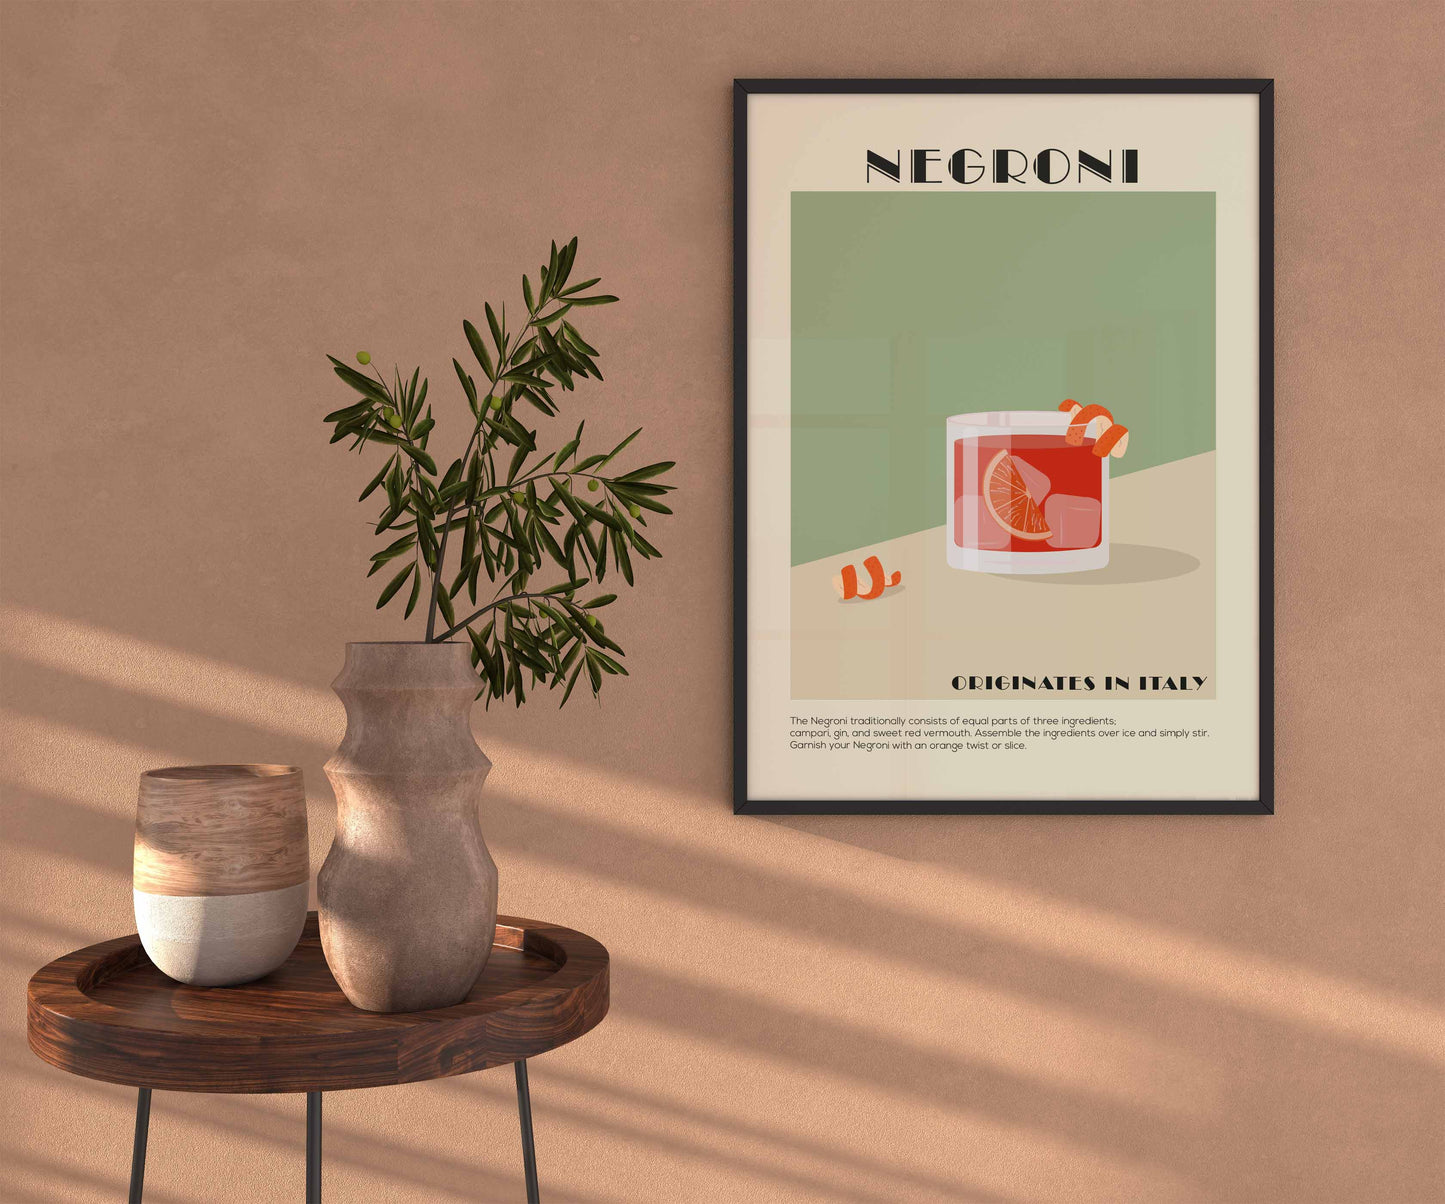 Negroni Cocktail Print in an Art Deco Style